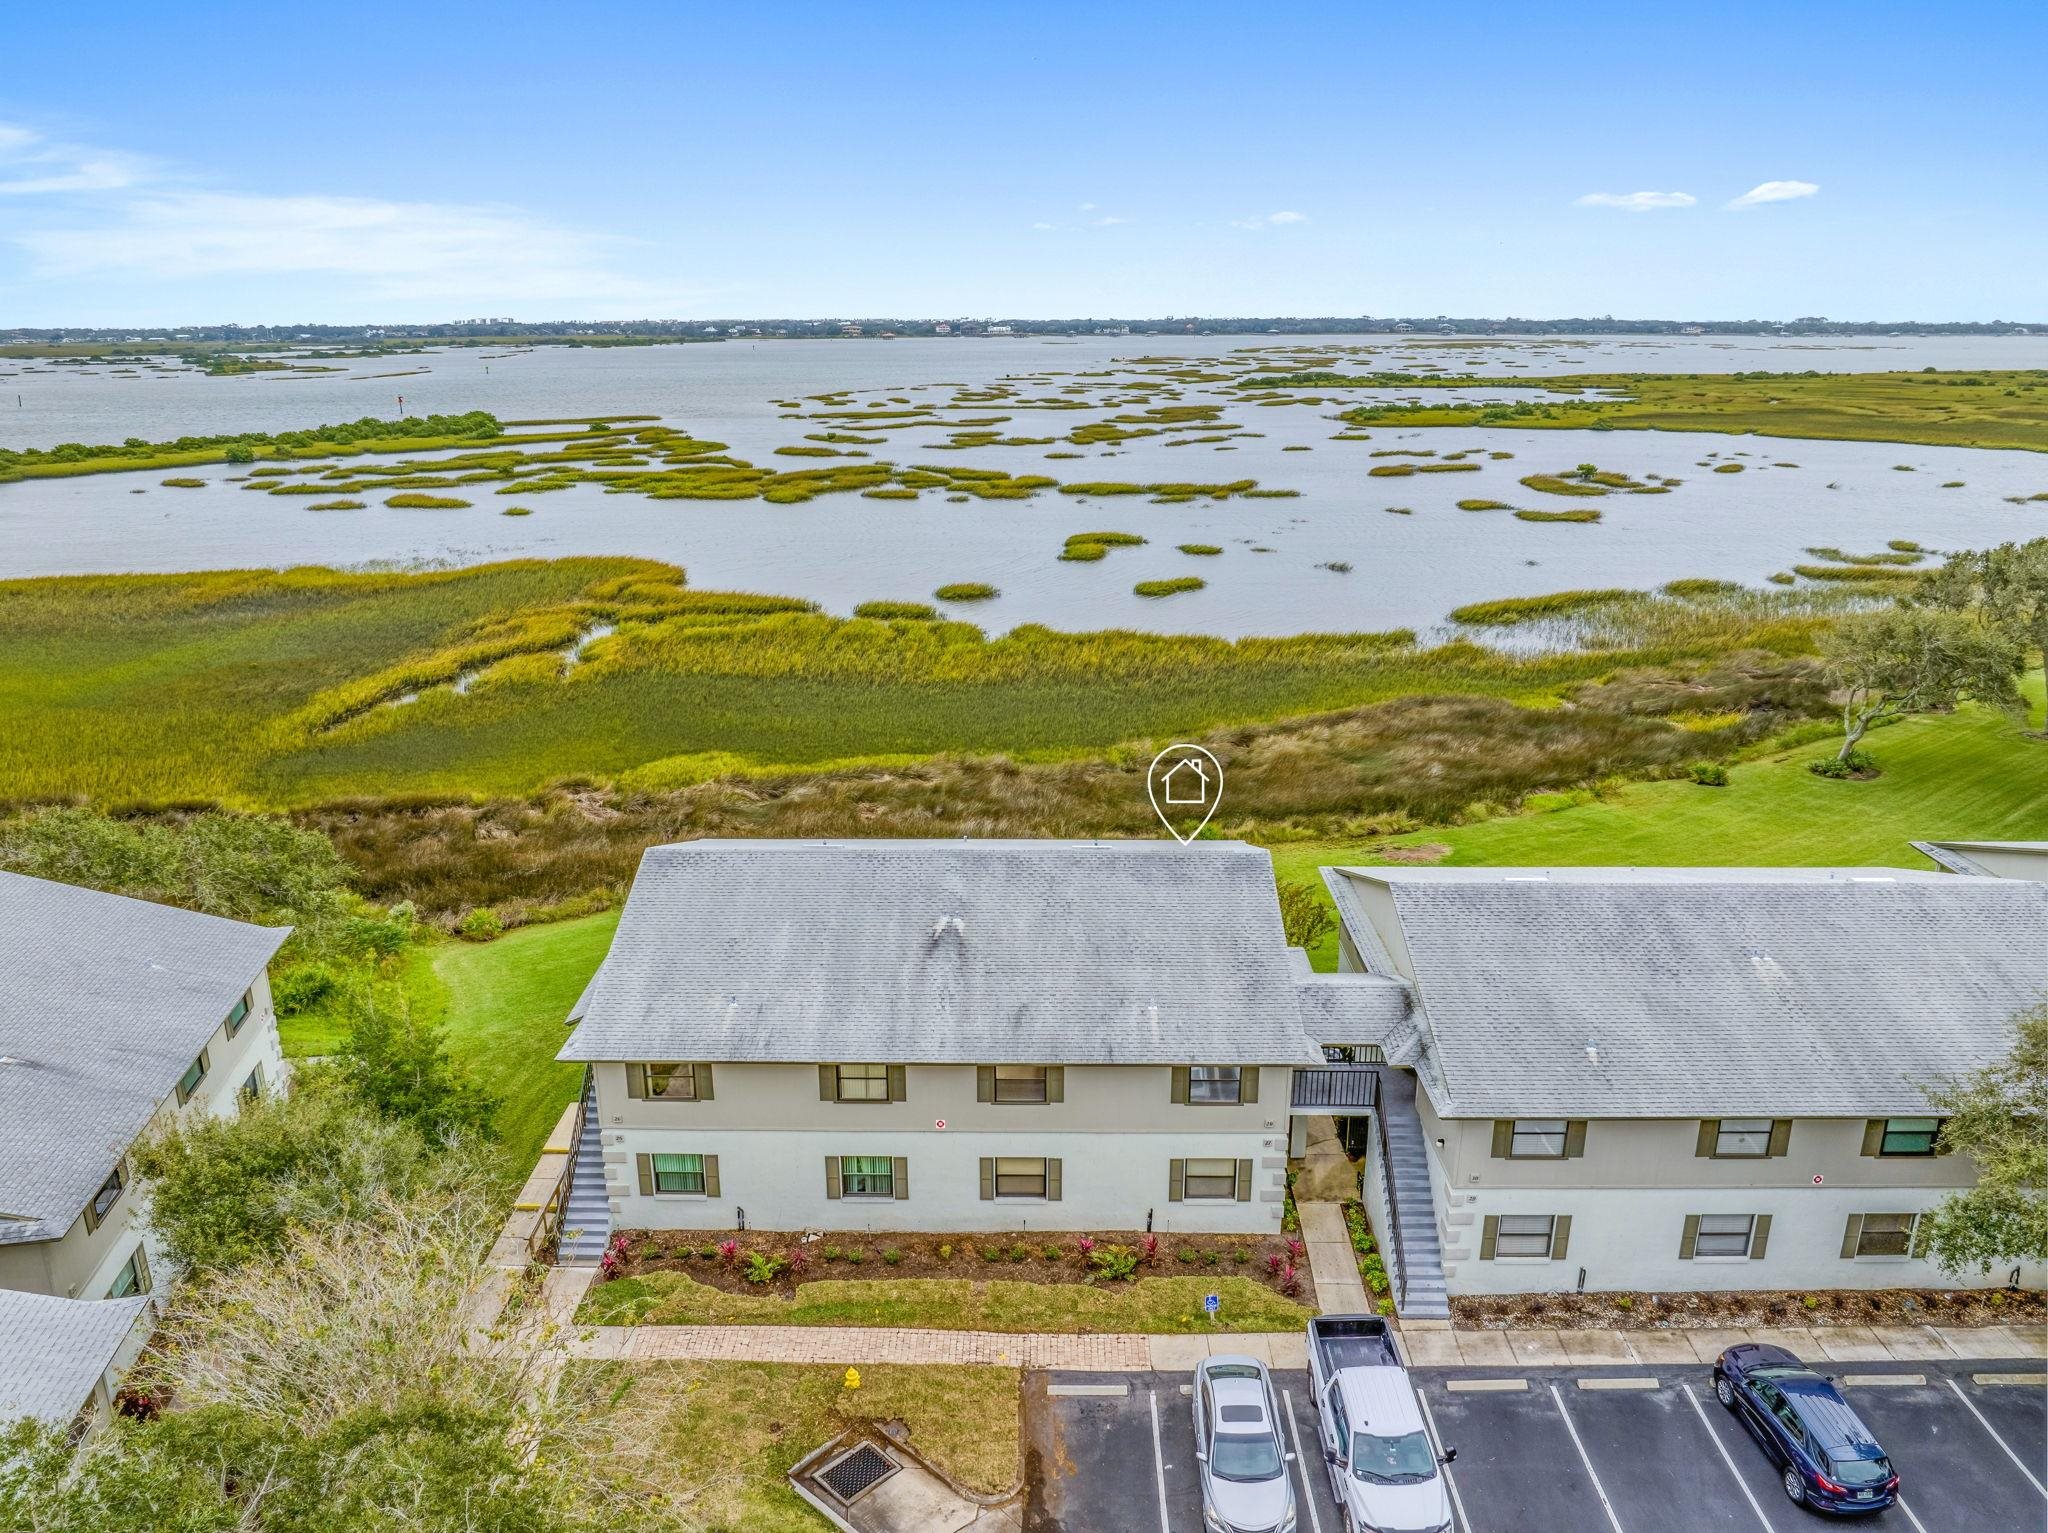 Aerial view of 28 Santiago Ct, located on the Intracoastal Waterway with unobstructed views!